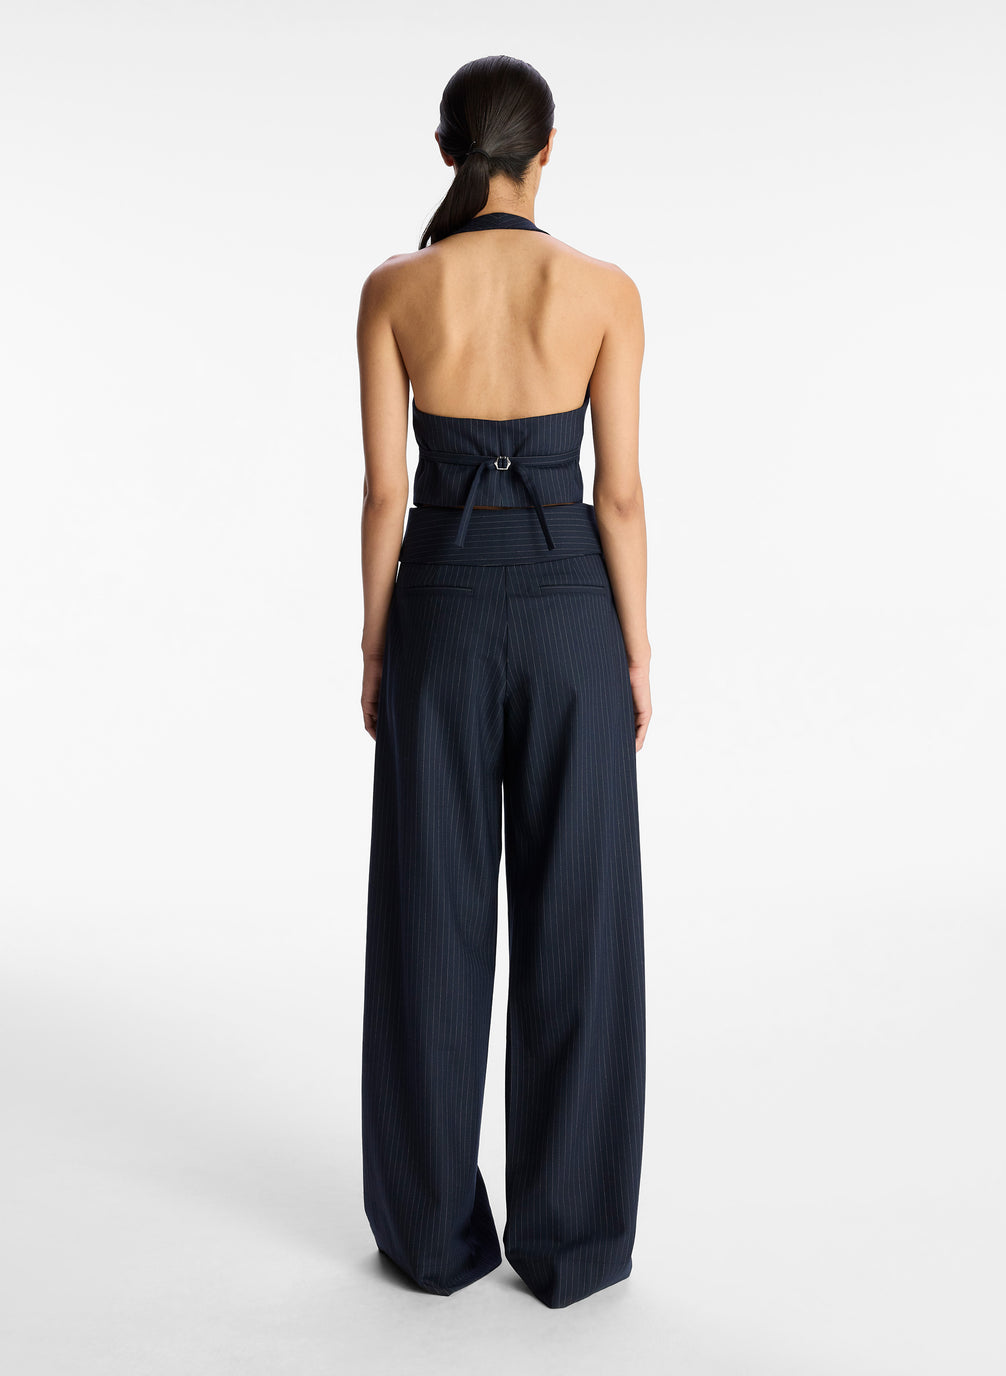 back view of  view of woman wearing navy blue pinstripe suit comprised of vest and fold over wide leg pants